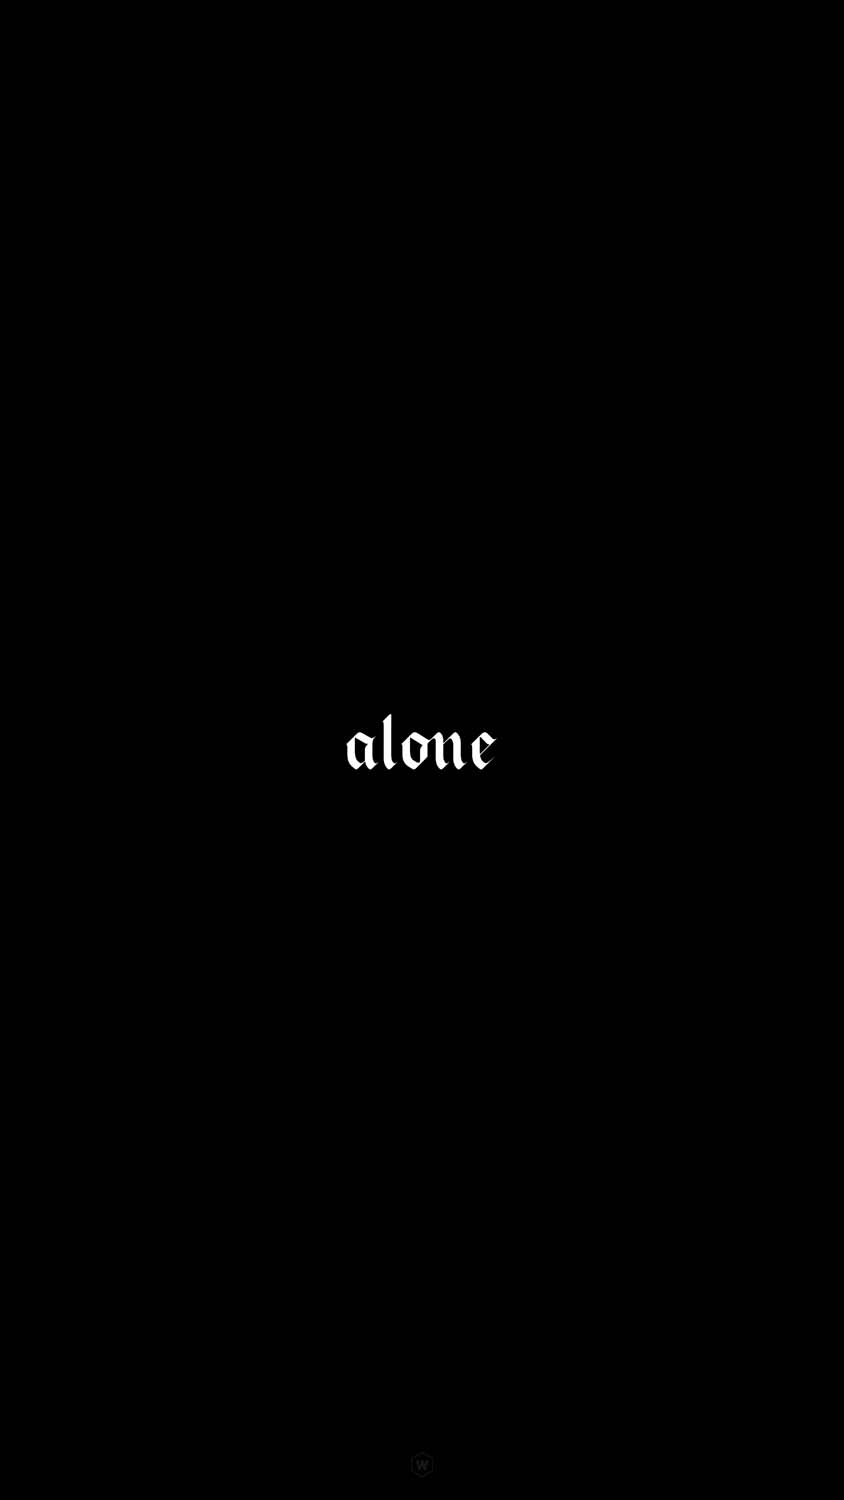 Alone And Dark IPhone Wallpaper HD - IPhone Wallpapers : iPhone Wallpapers